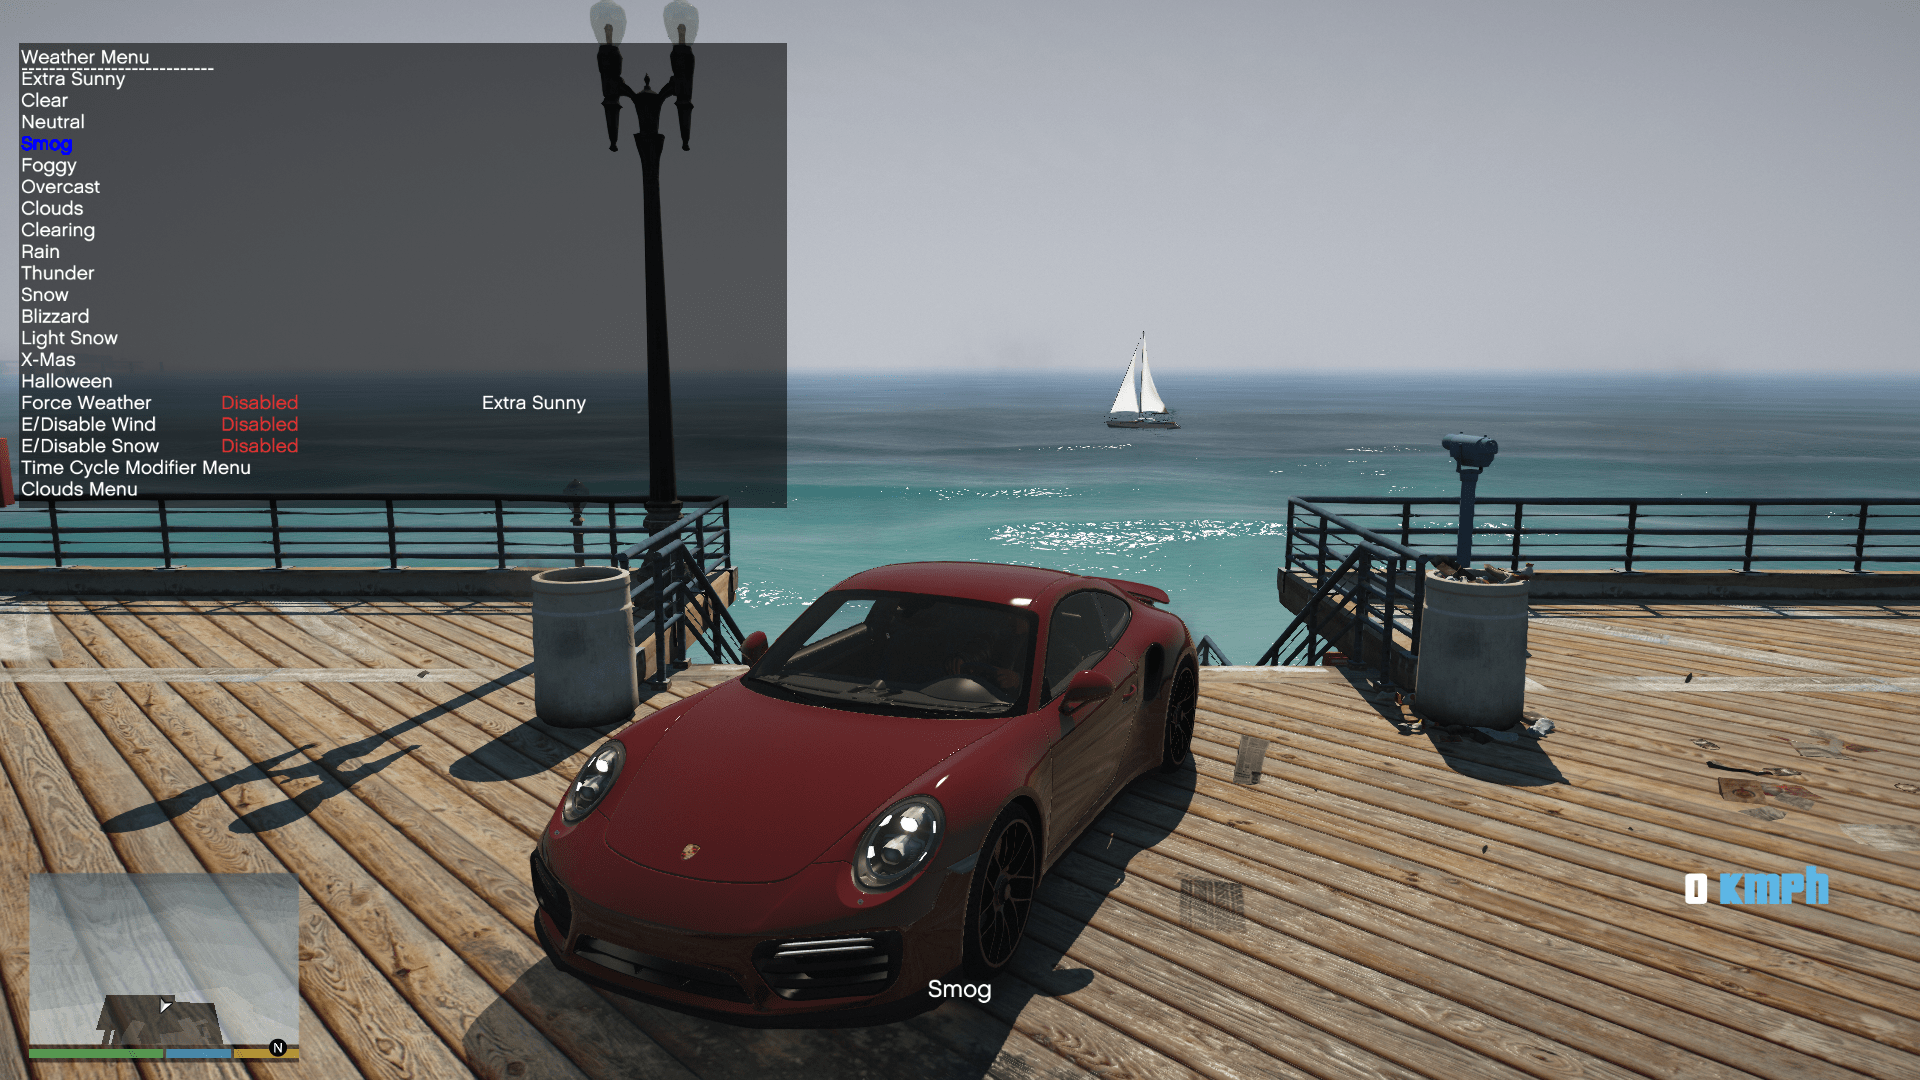 Grand Theft Auto V Mod Aims to Enable Photorealistic Graphics